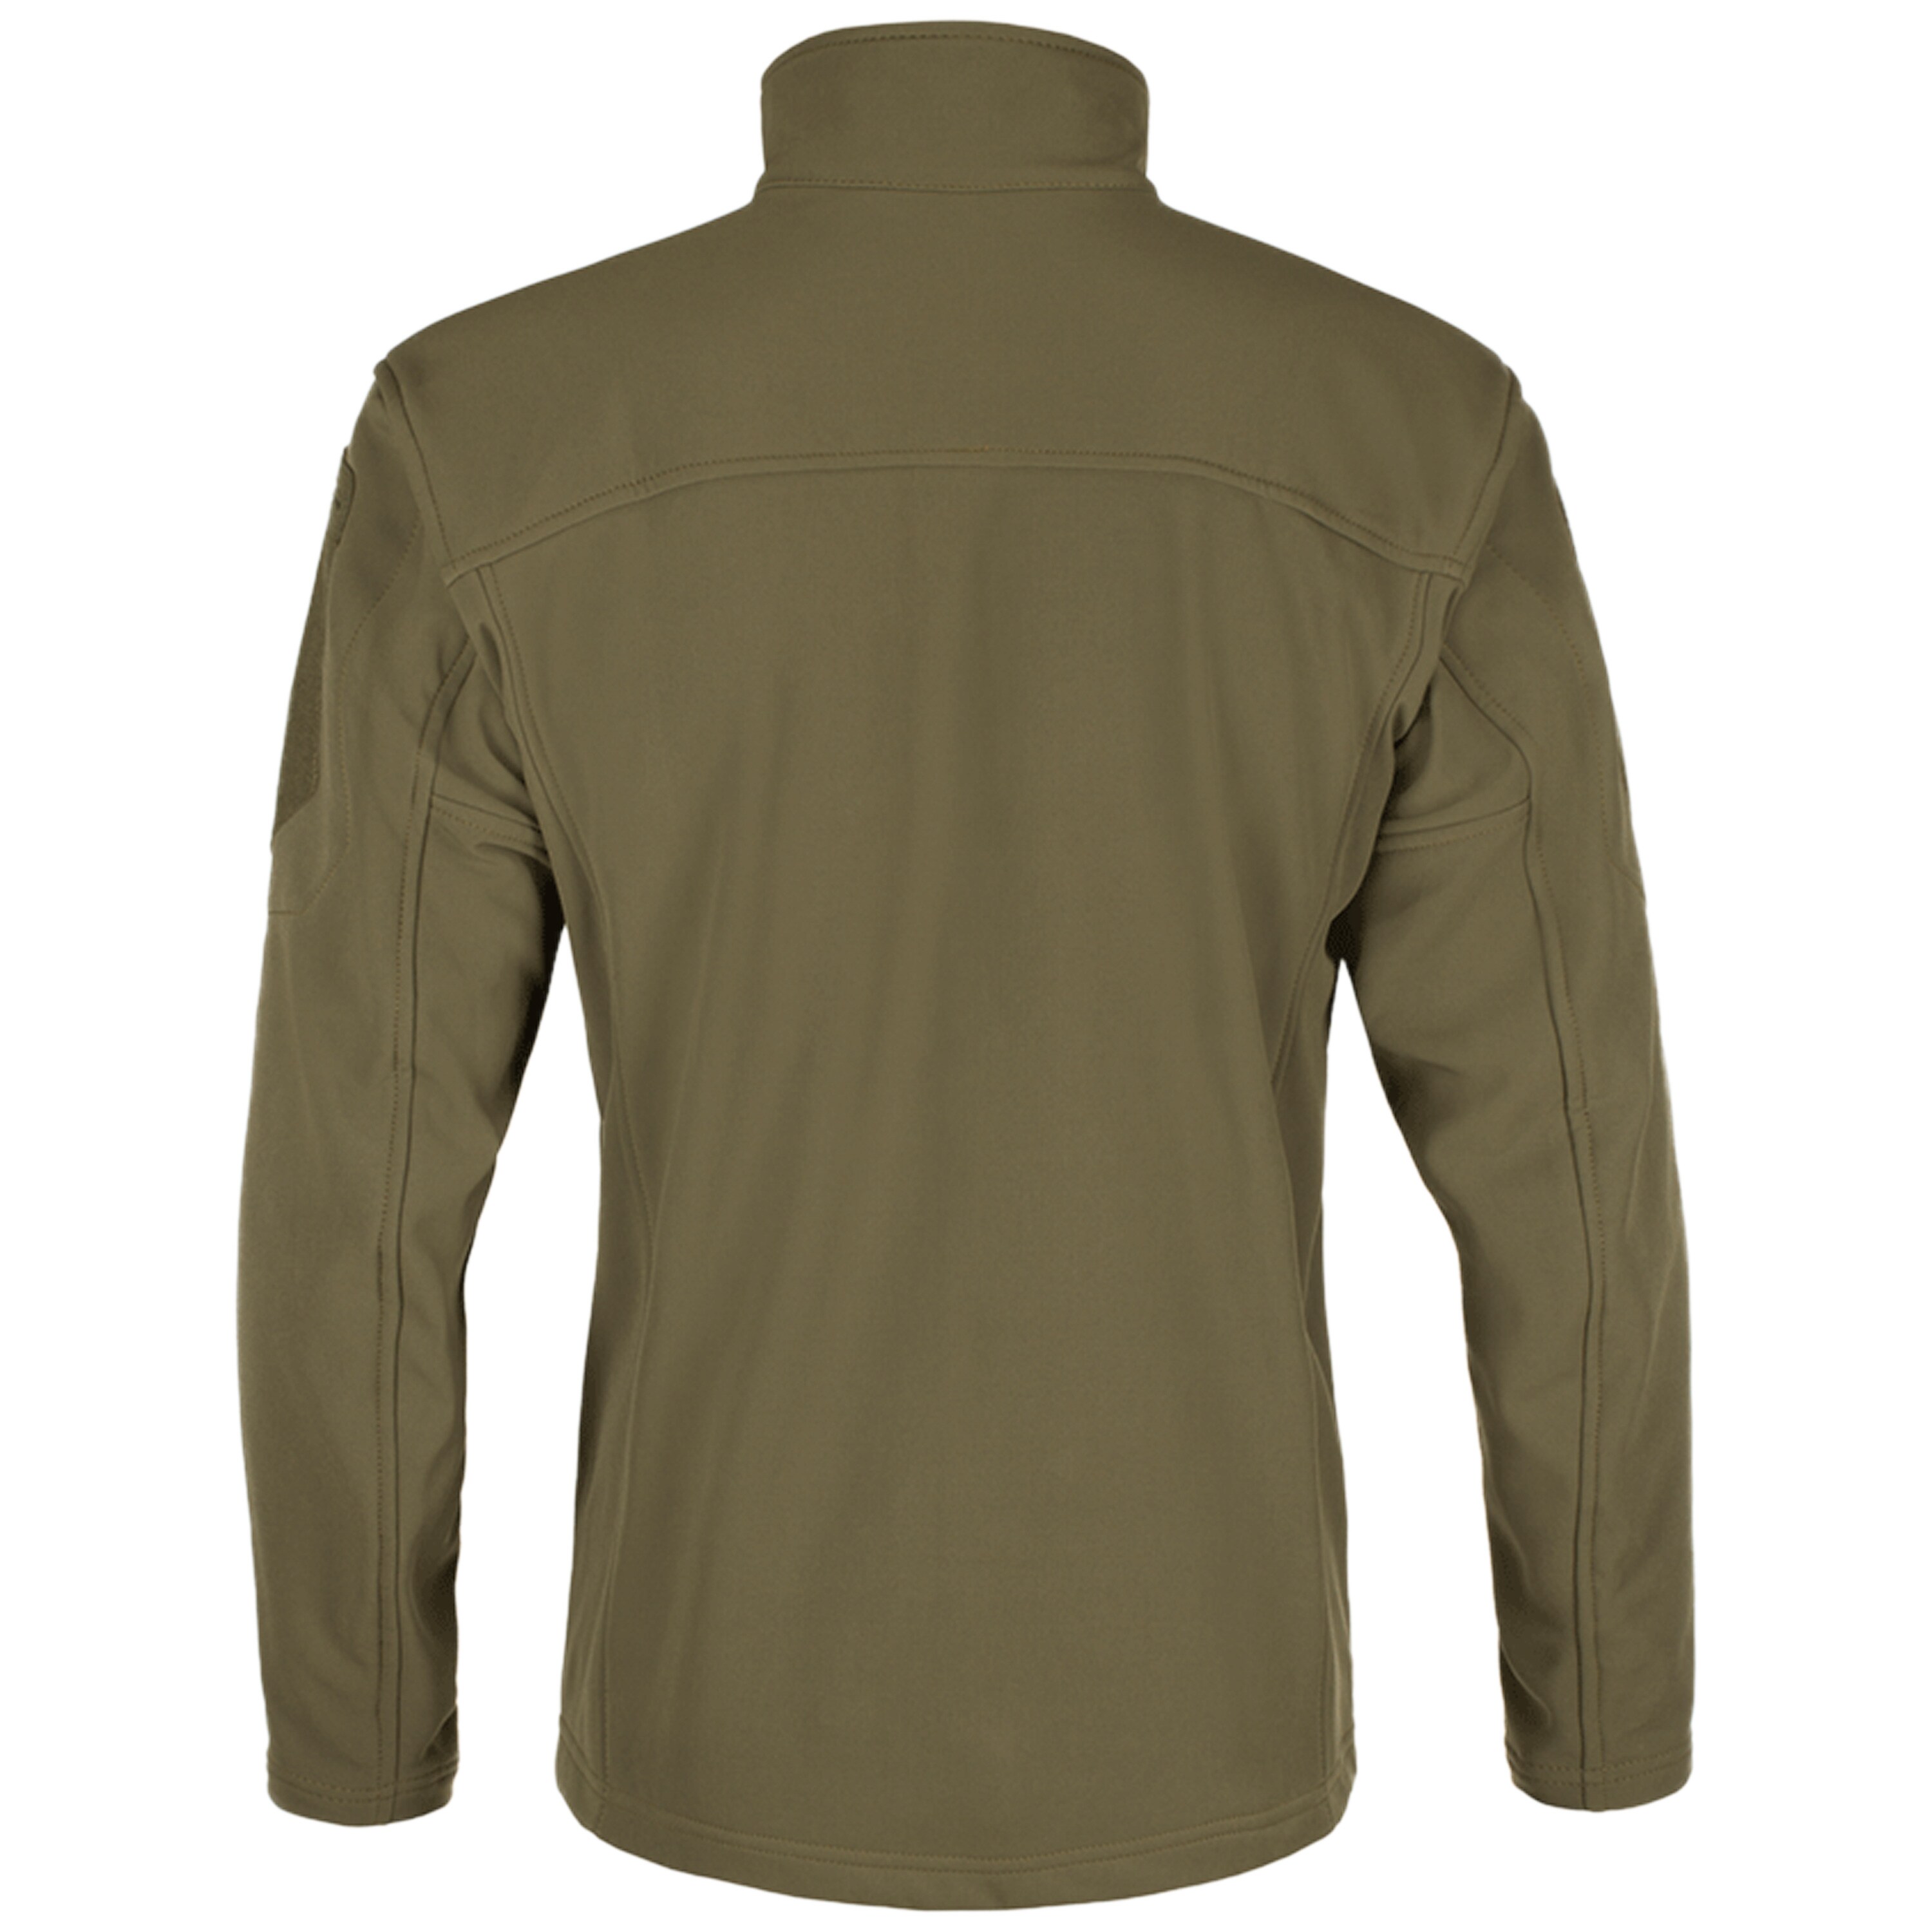 Purchase the Clawgear Jacket Audax Softshell stone gray olive by